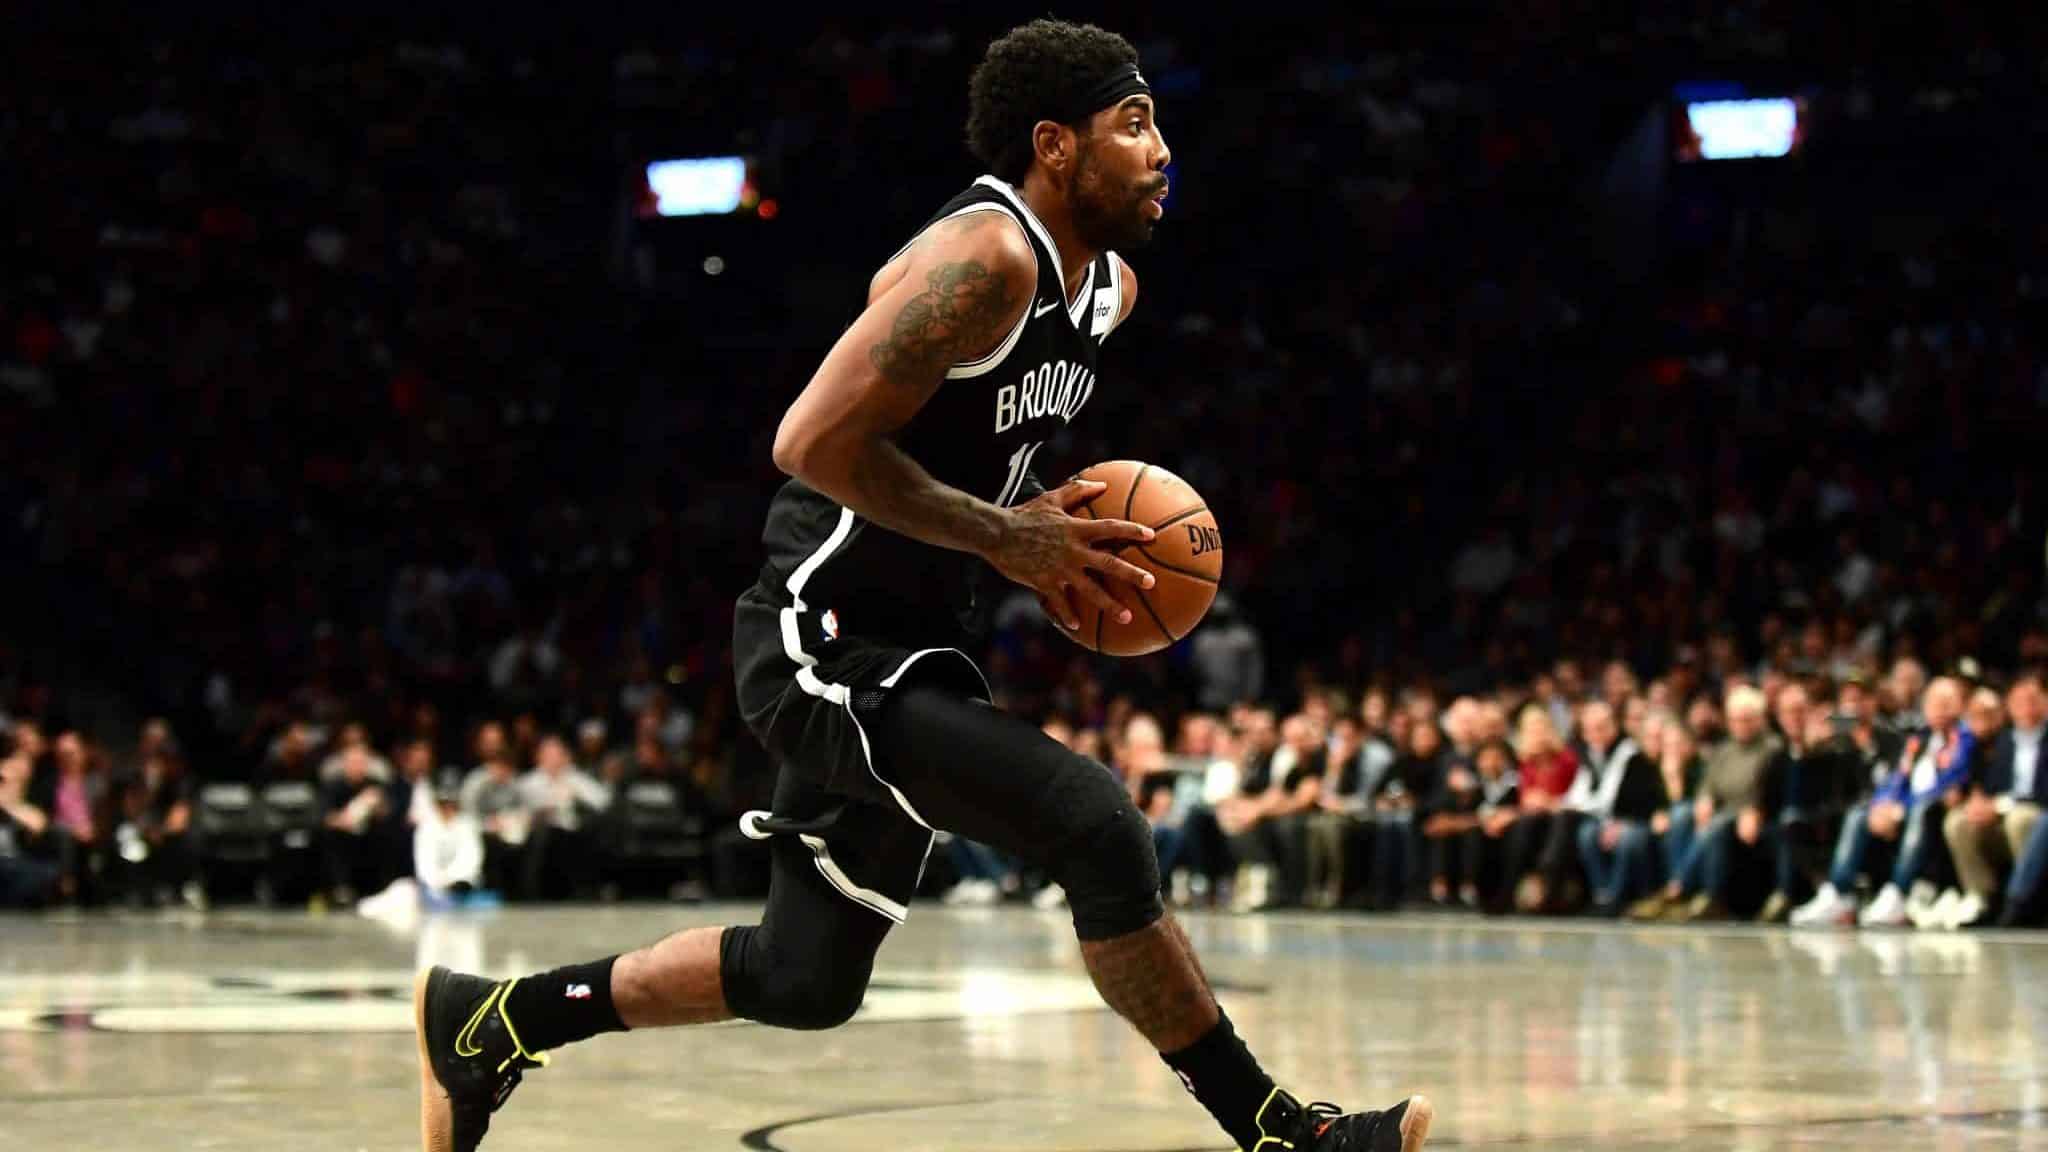 NEW YORK, NEW YORK - OCTOBER 25: Kyrie Irving #11 of the Brooklyn Nets conrols the ball during the first half of their game against the New York Knicks at Barclays Center on October 25, 2019 in the Brooklyn borough of New York City.